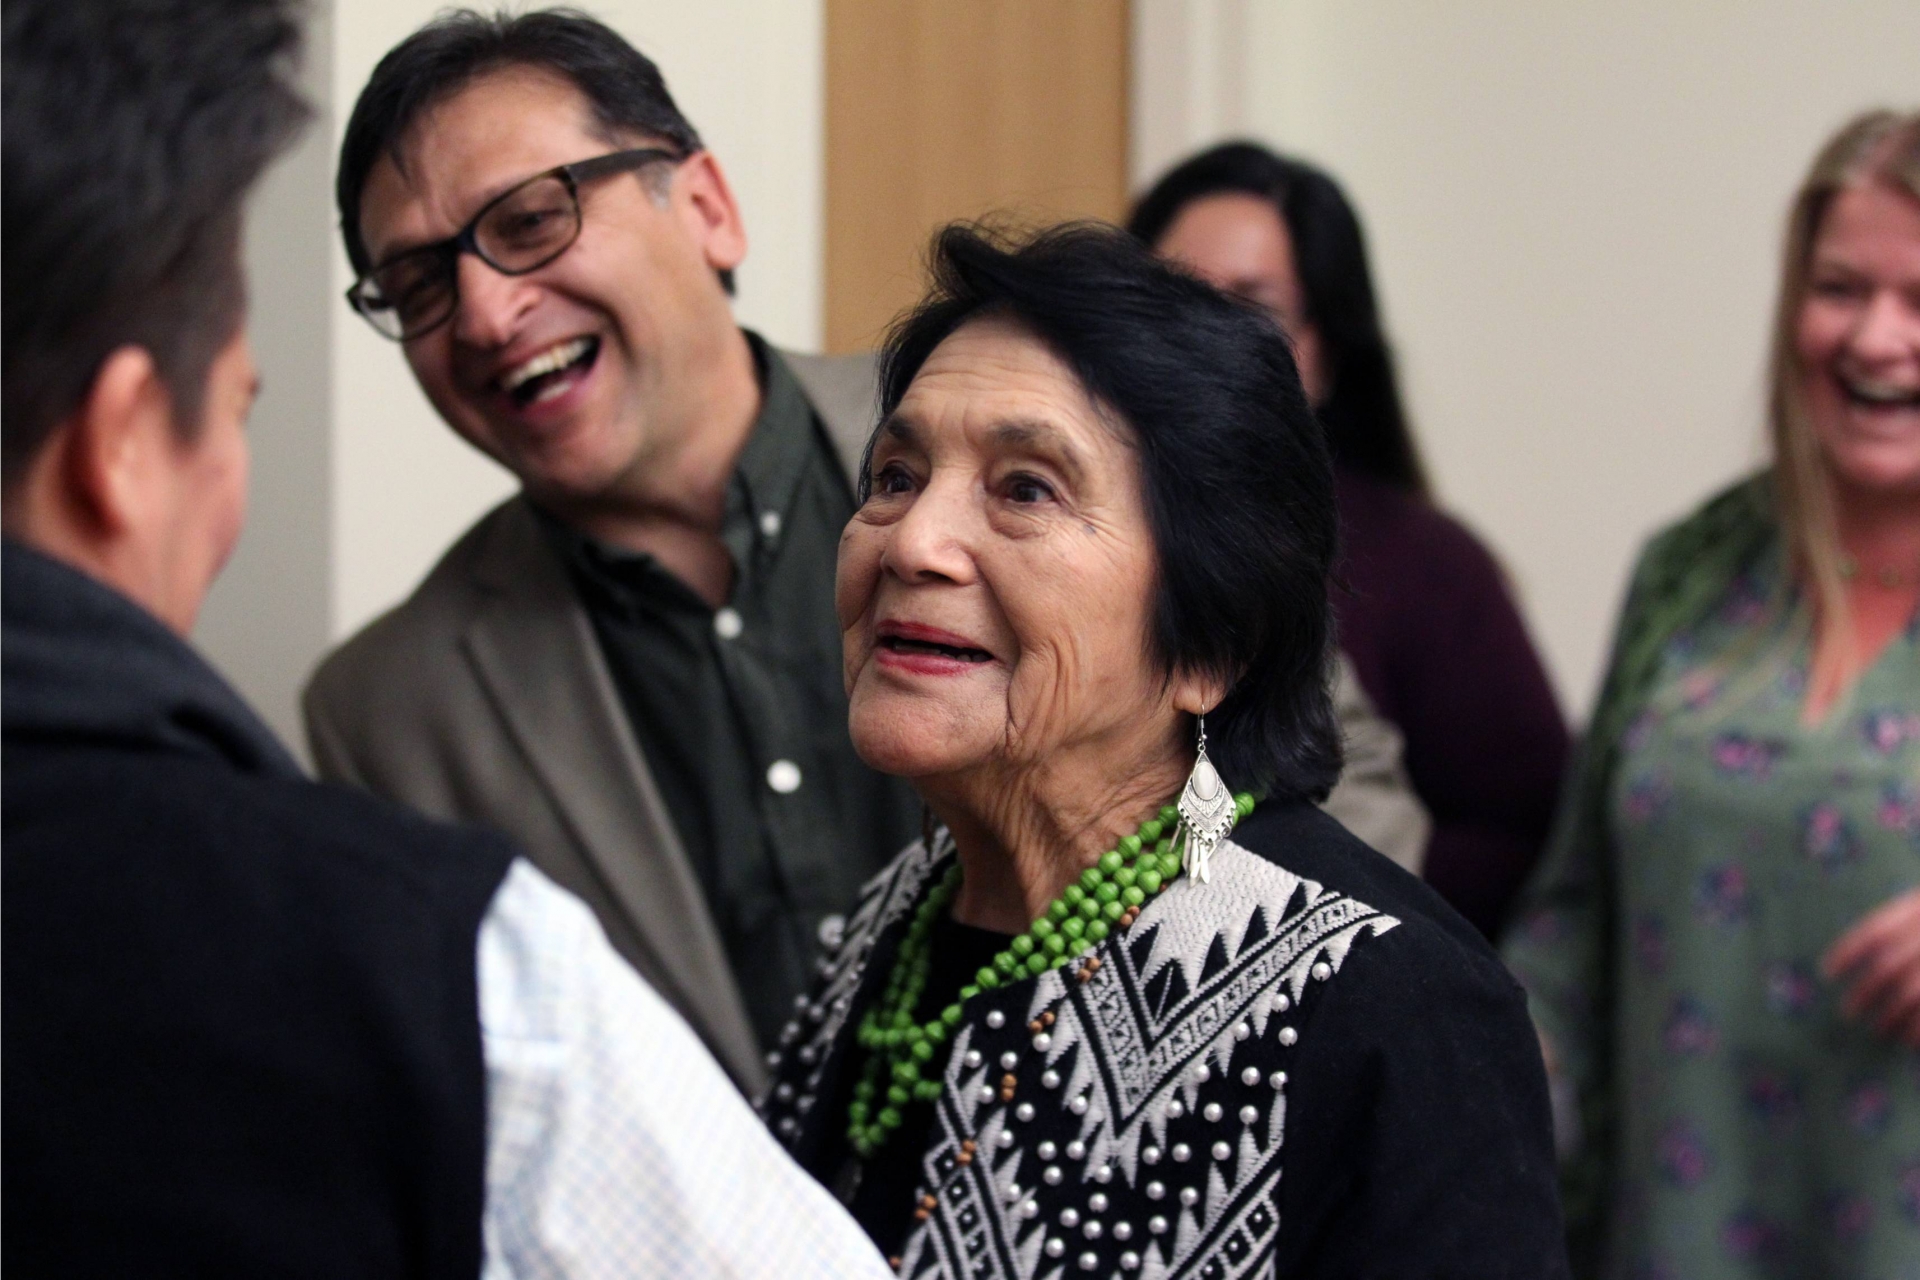 Dolores Huerta speaking to a group of people